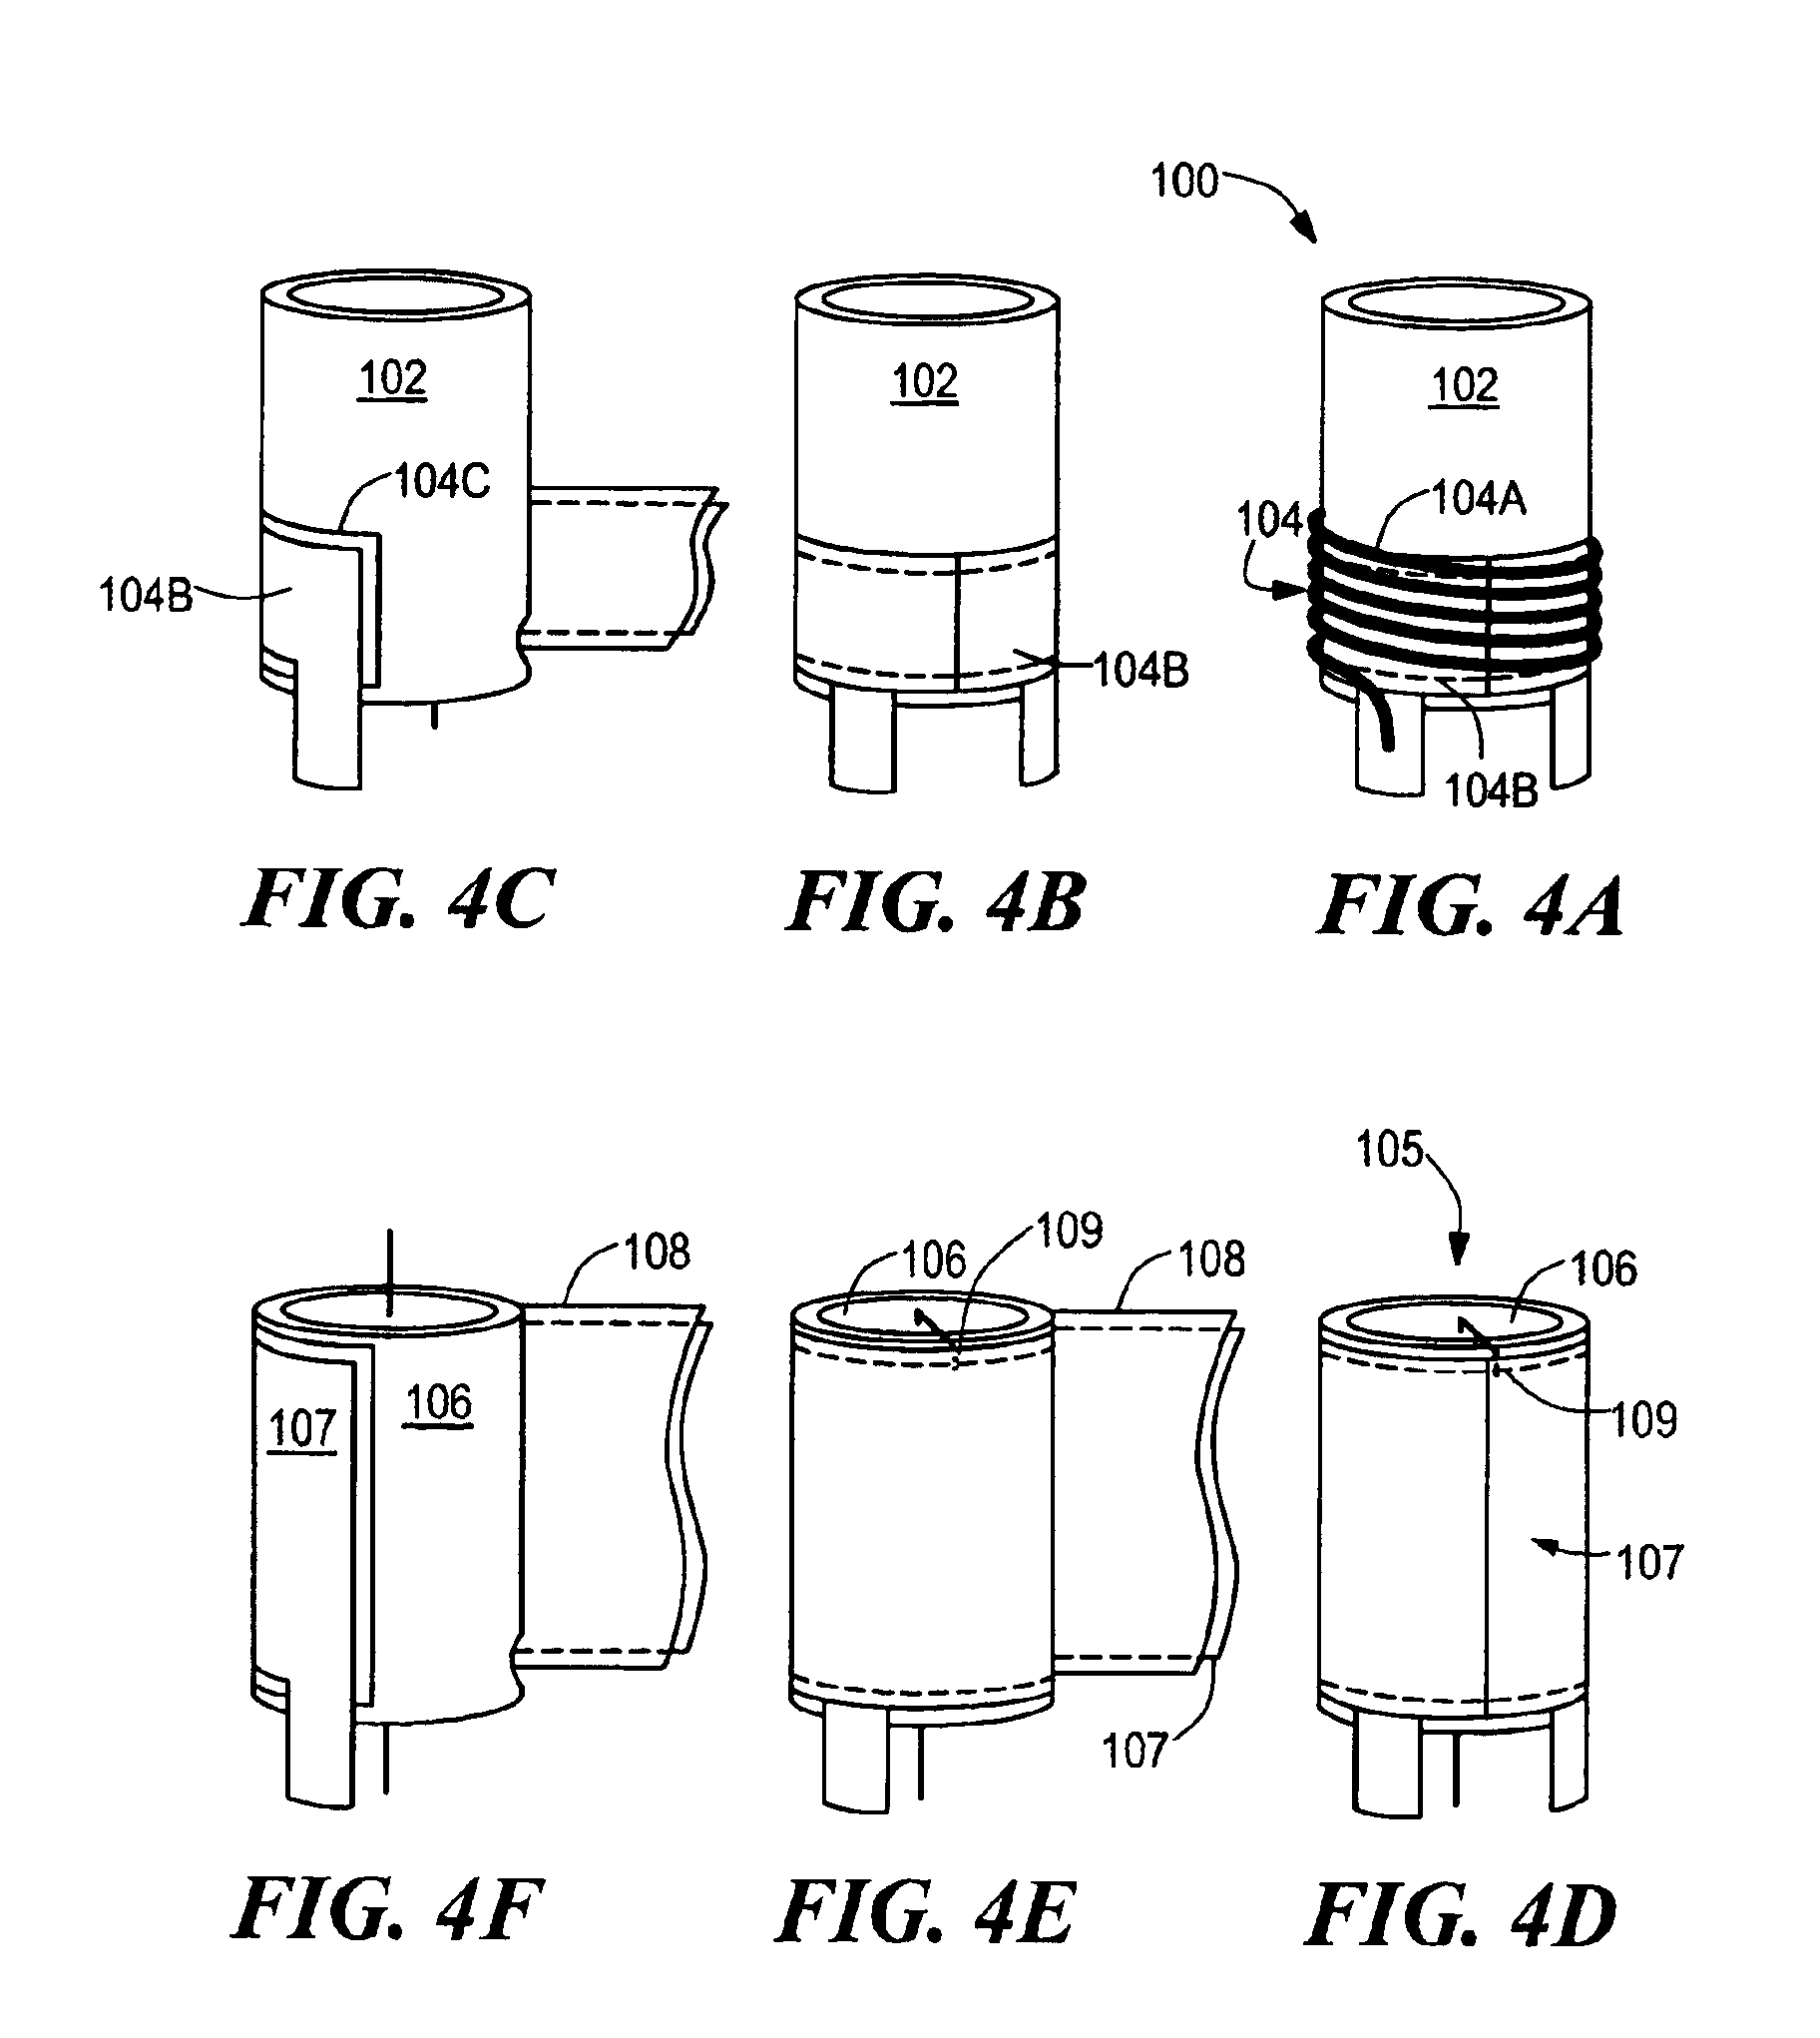 Filter having parasitic inductance cancellation